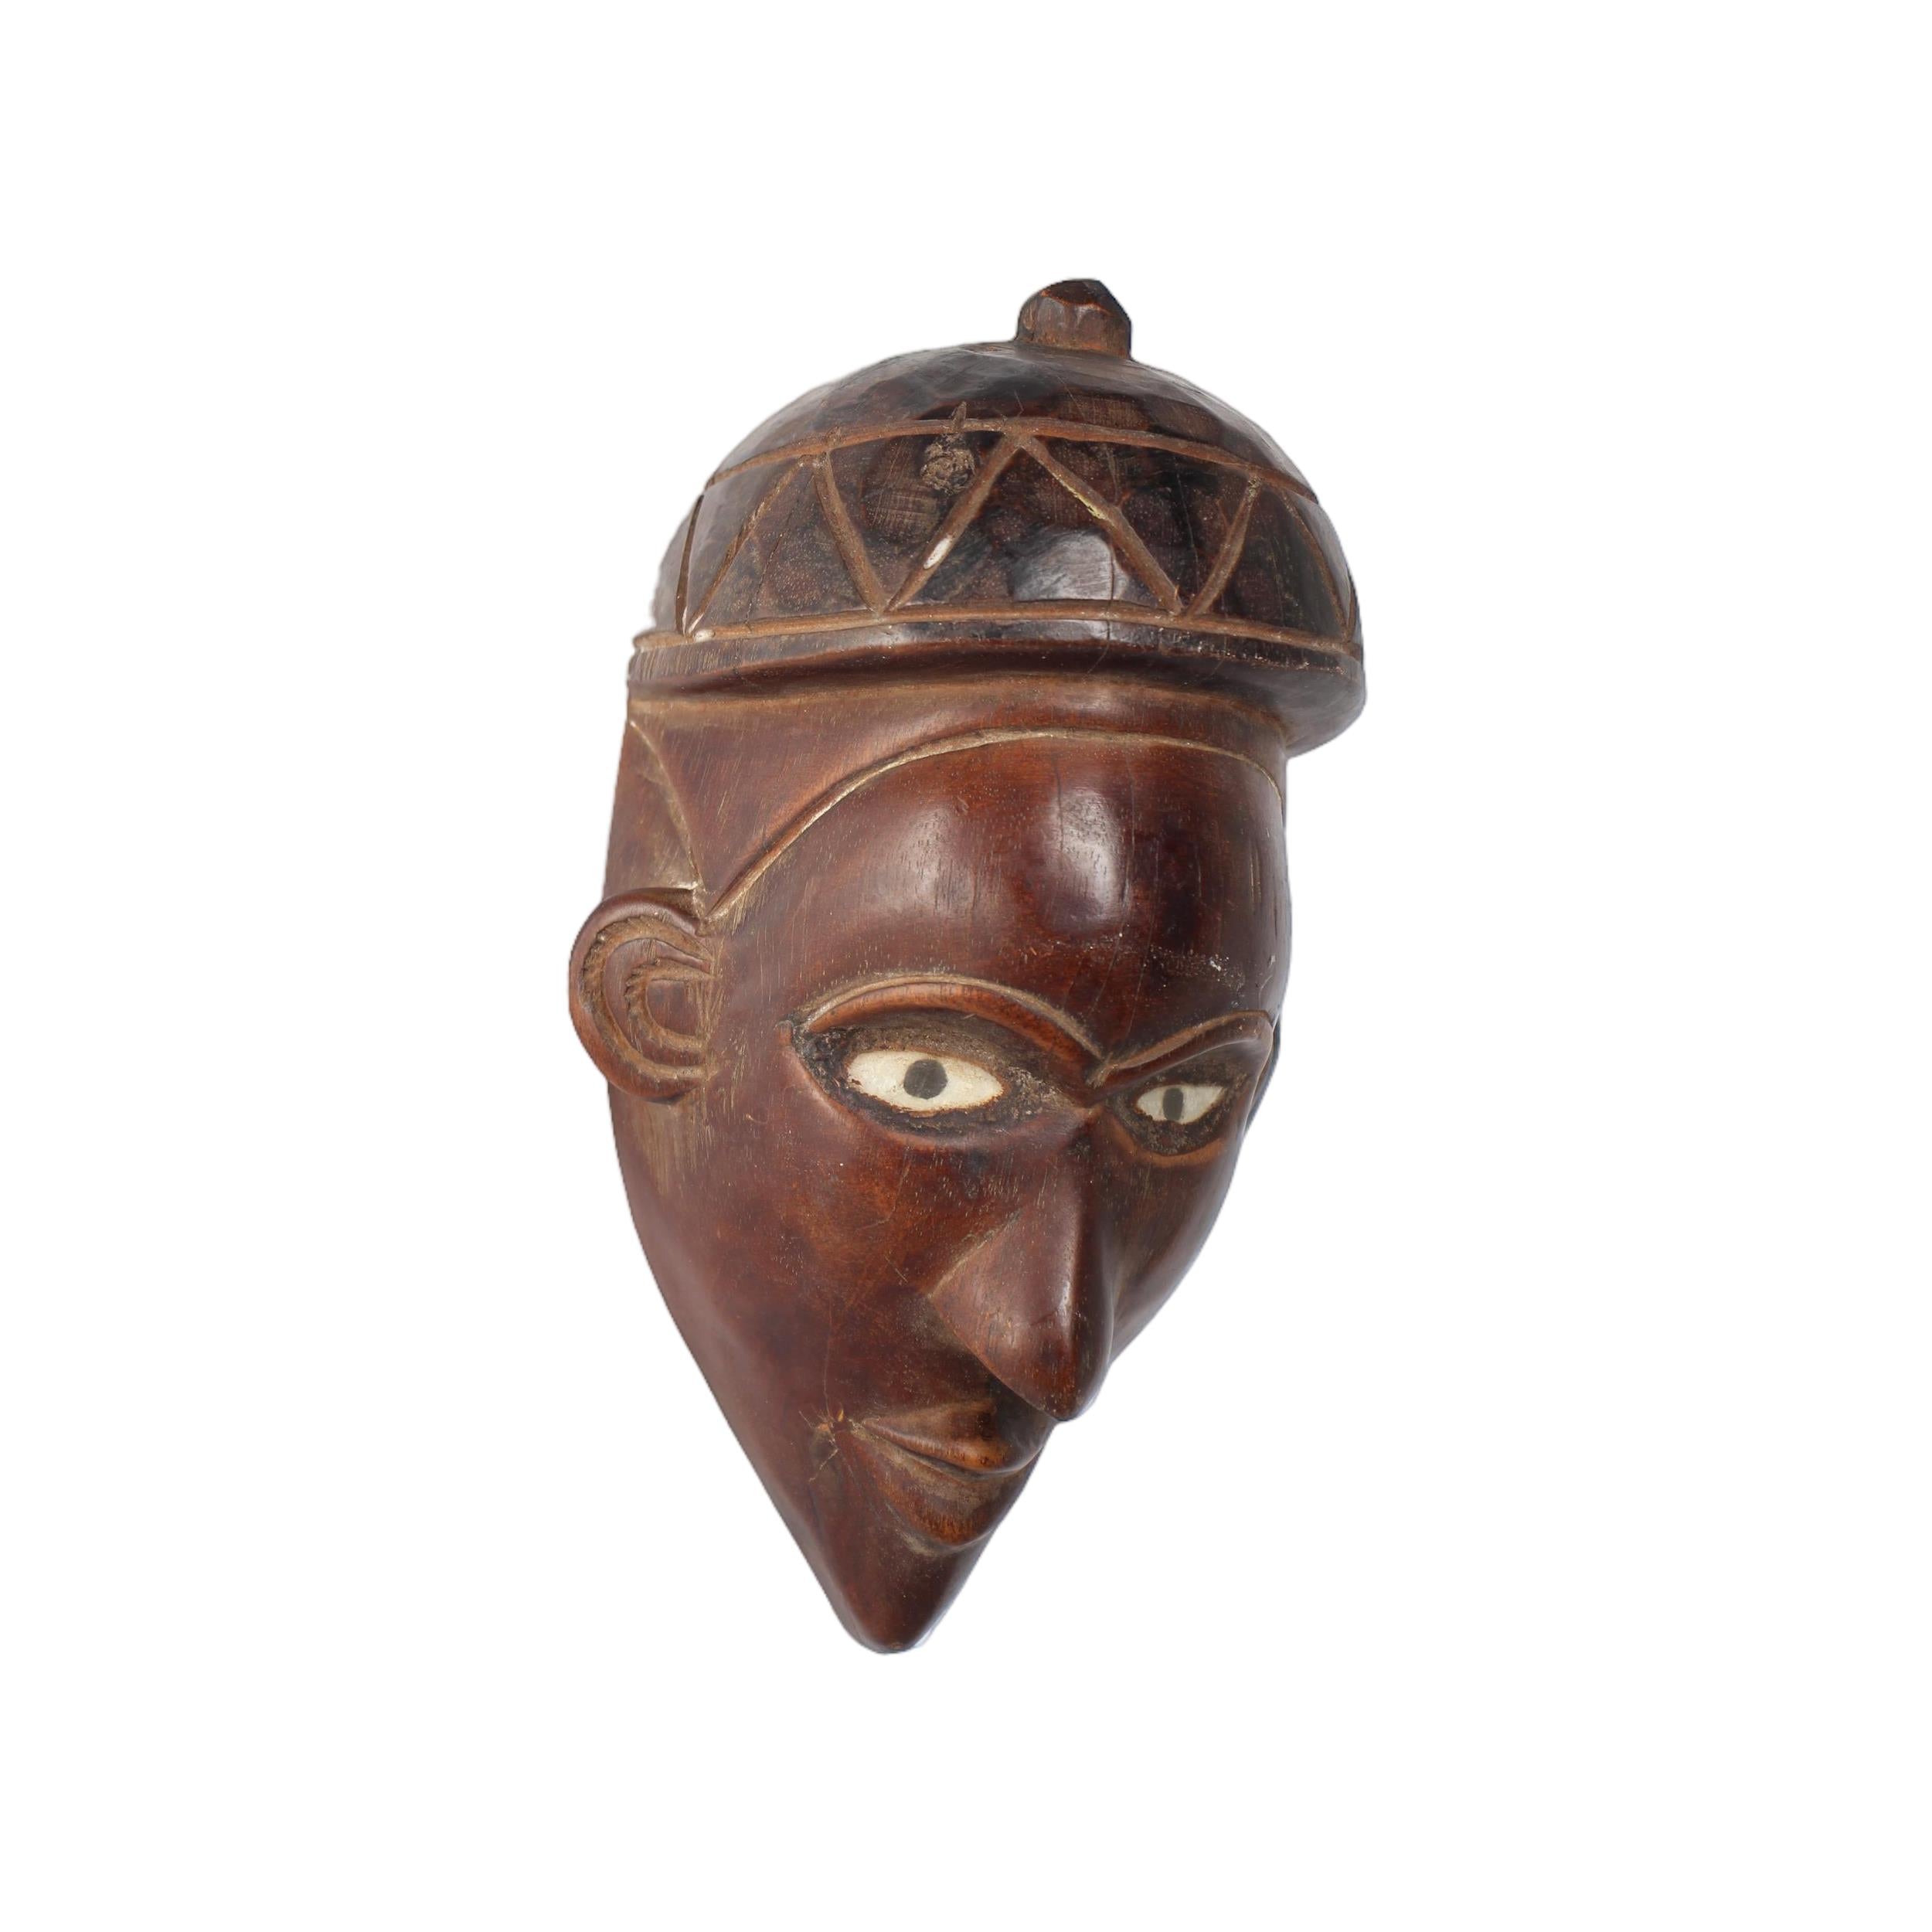 Pende Tribe Mask ~8.7" Tall - Mask